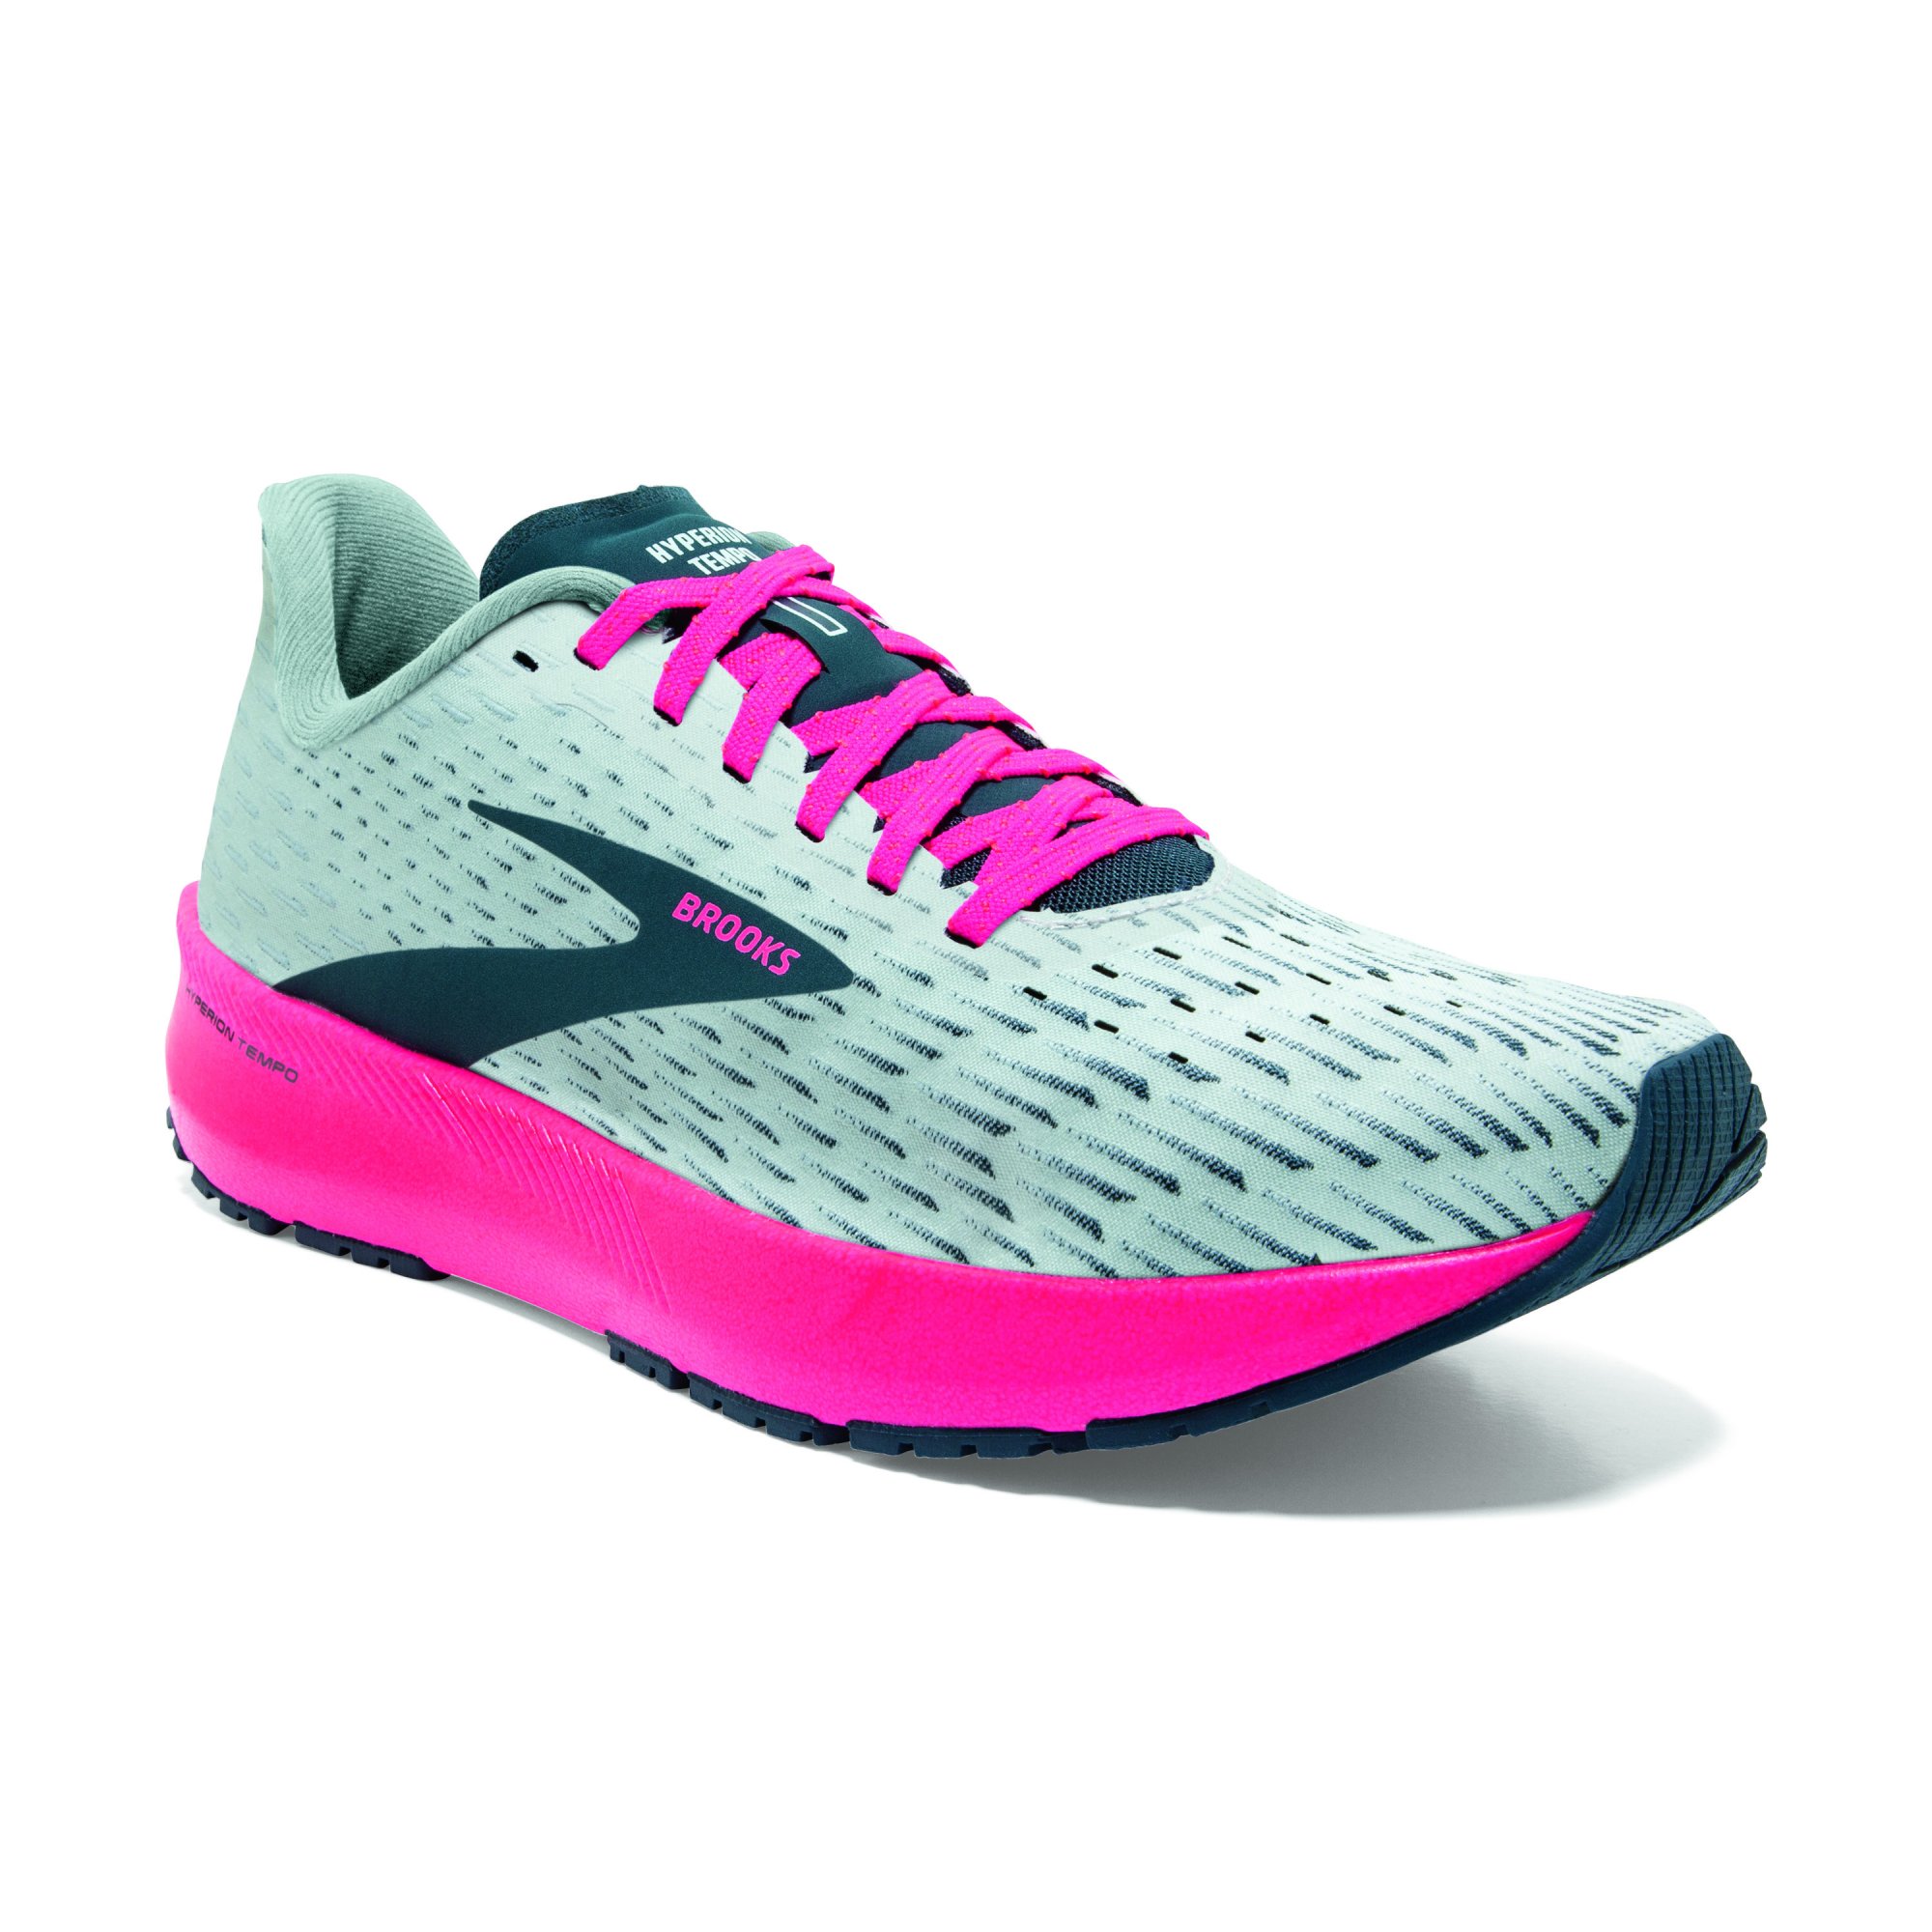 BROOKS Hyperion Tempo Ice Flow/Navy/Pink